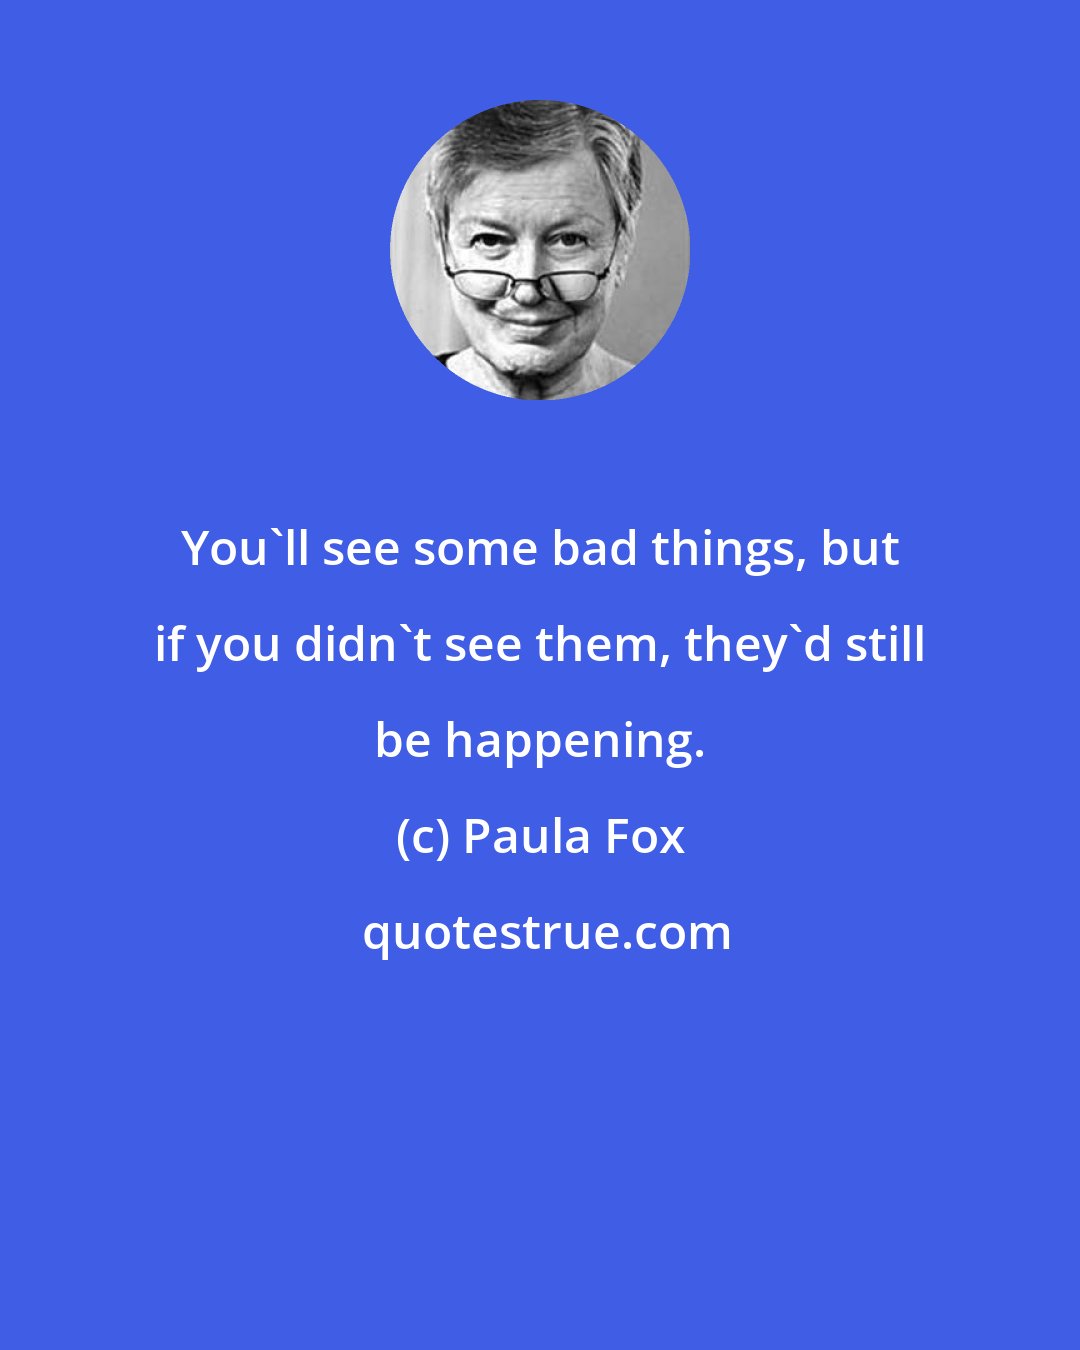 Paula Fox: You'll see some bad things, but if you didn't see them, they'd still be happening.